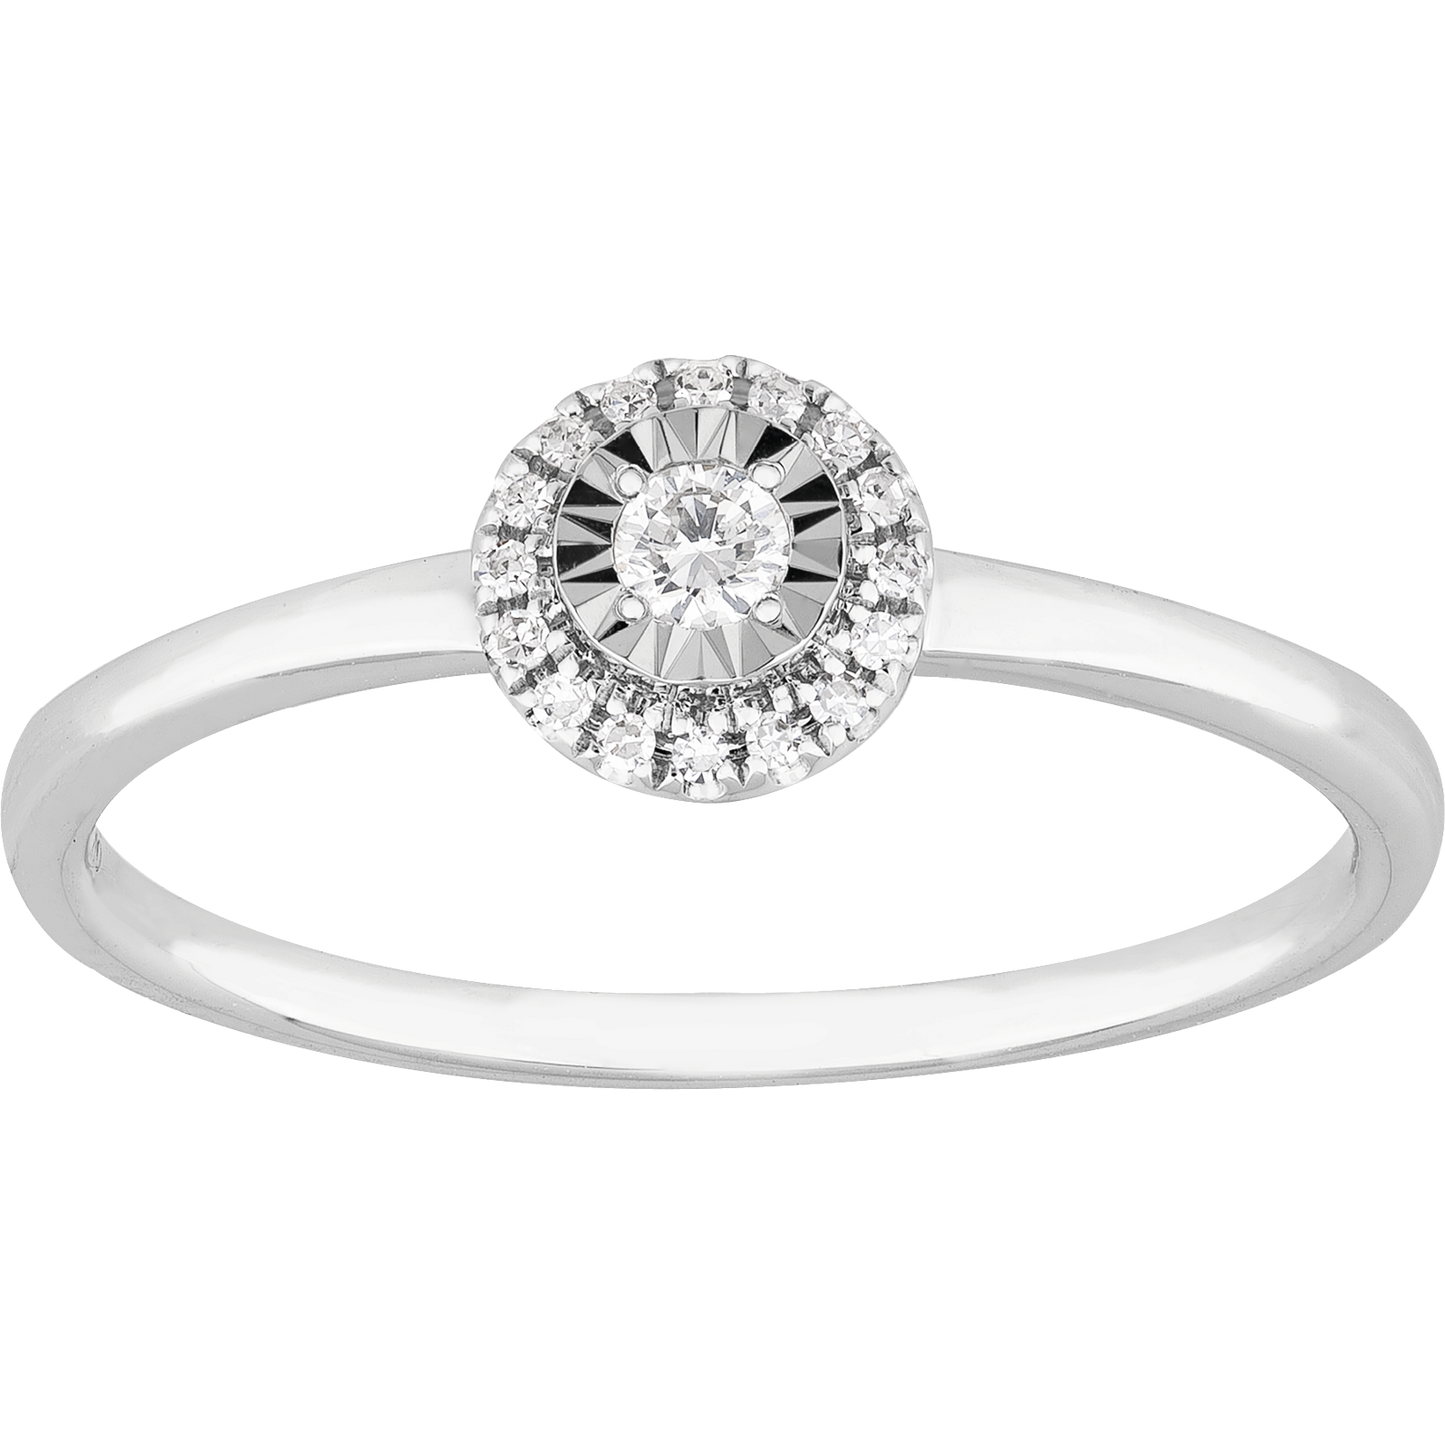 0.09ct Diamond Illusions Halo Engagement Ring in 9ct White Gold